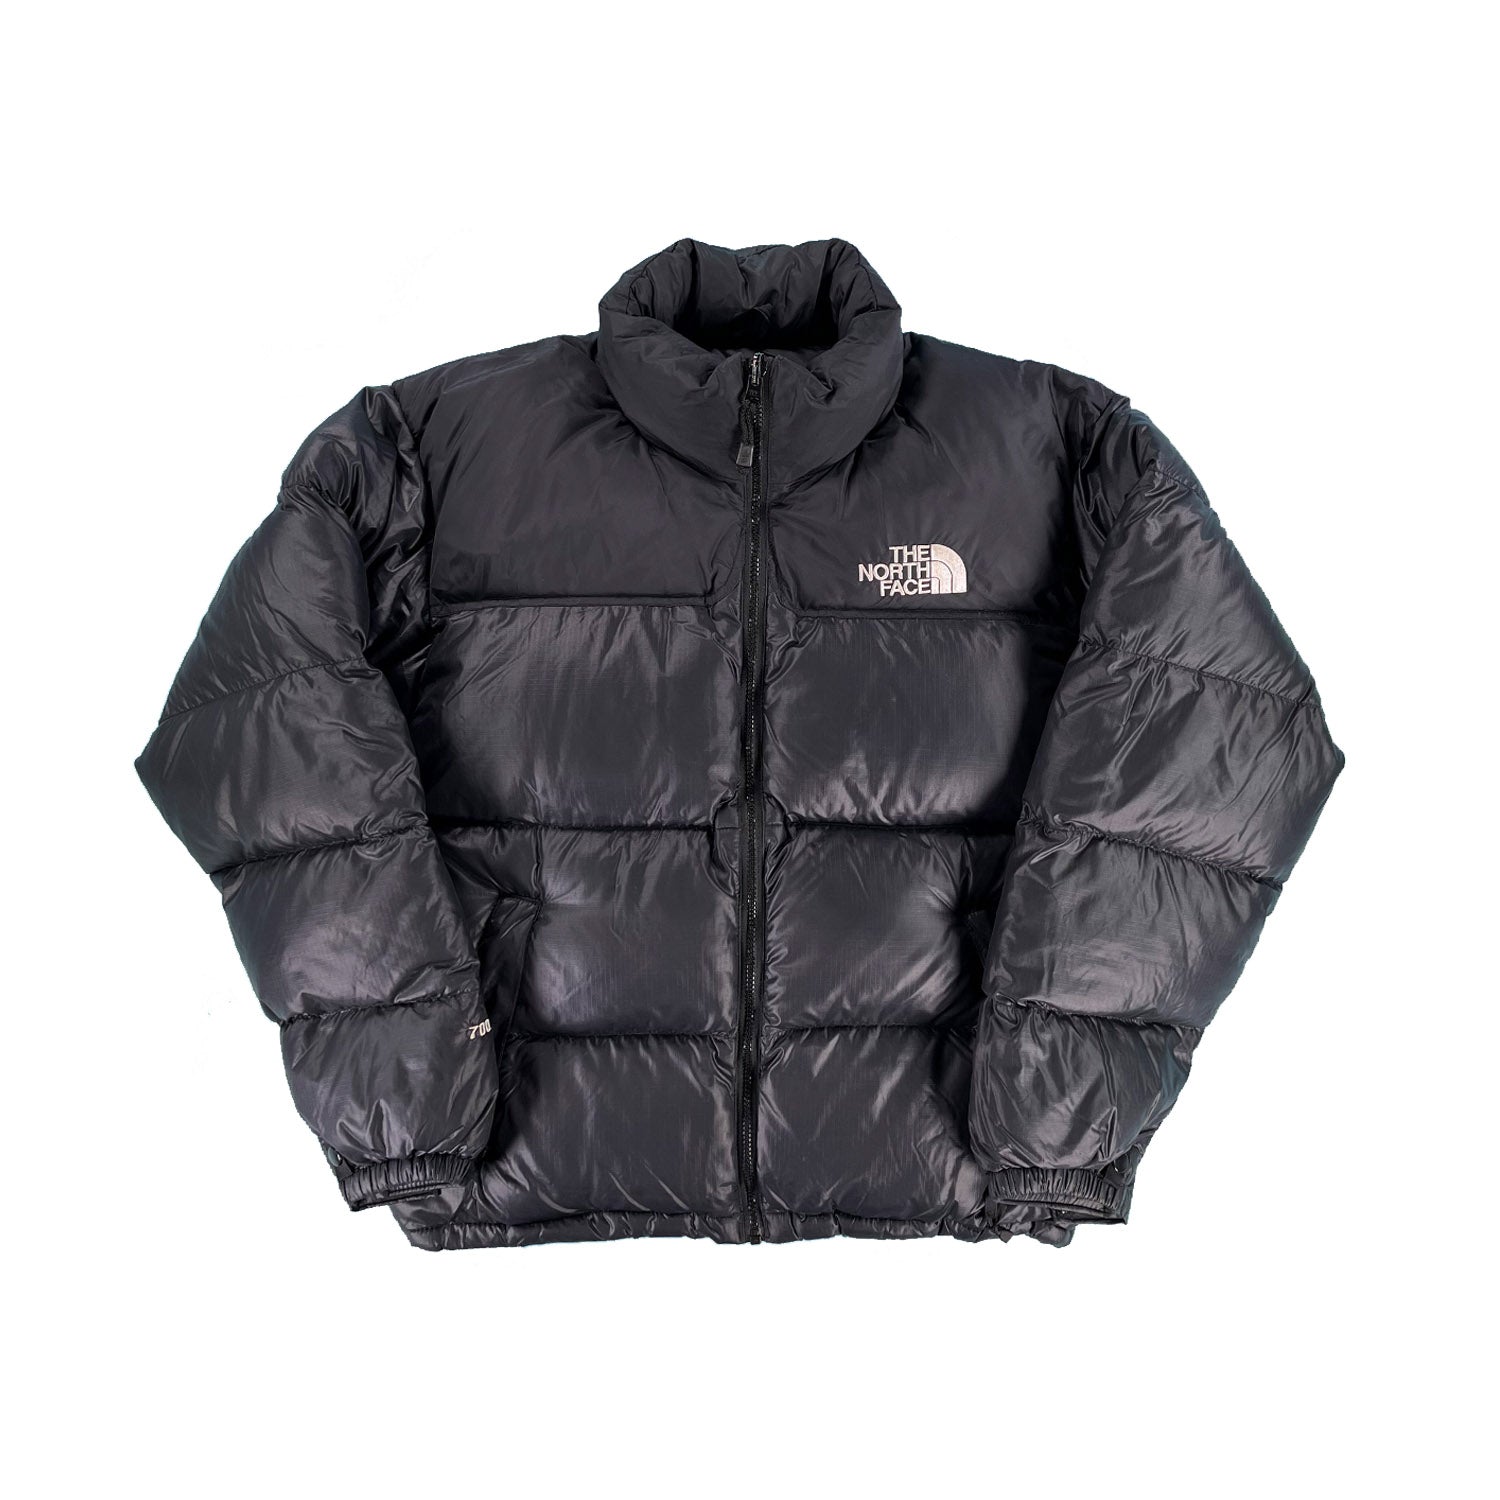 '90s The North Face 700 fill Nuptse puffer jacket M